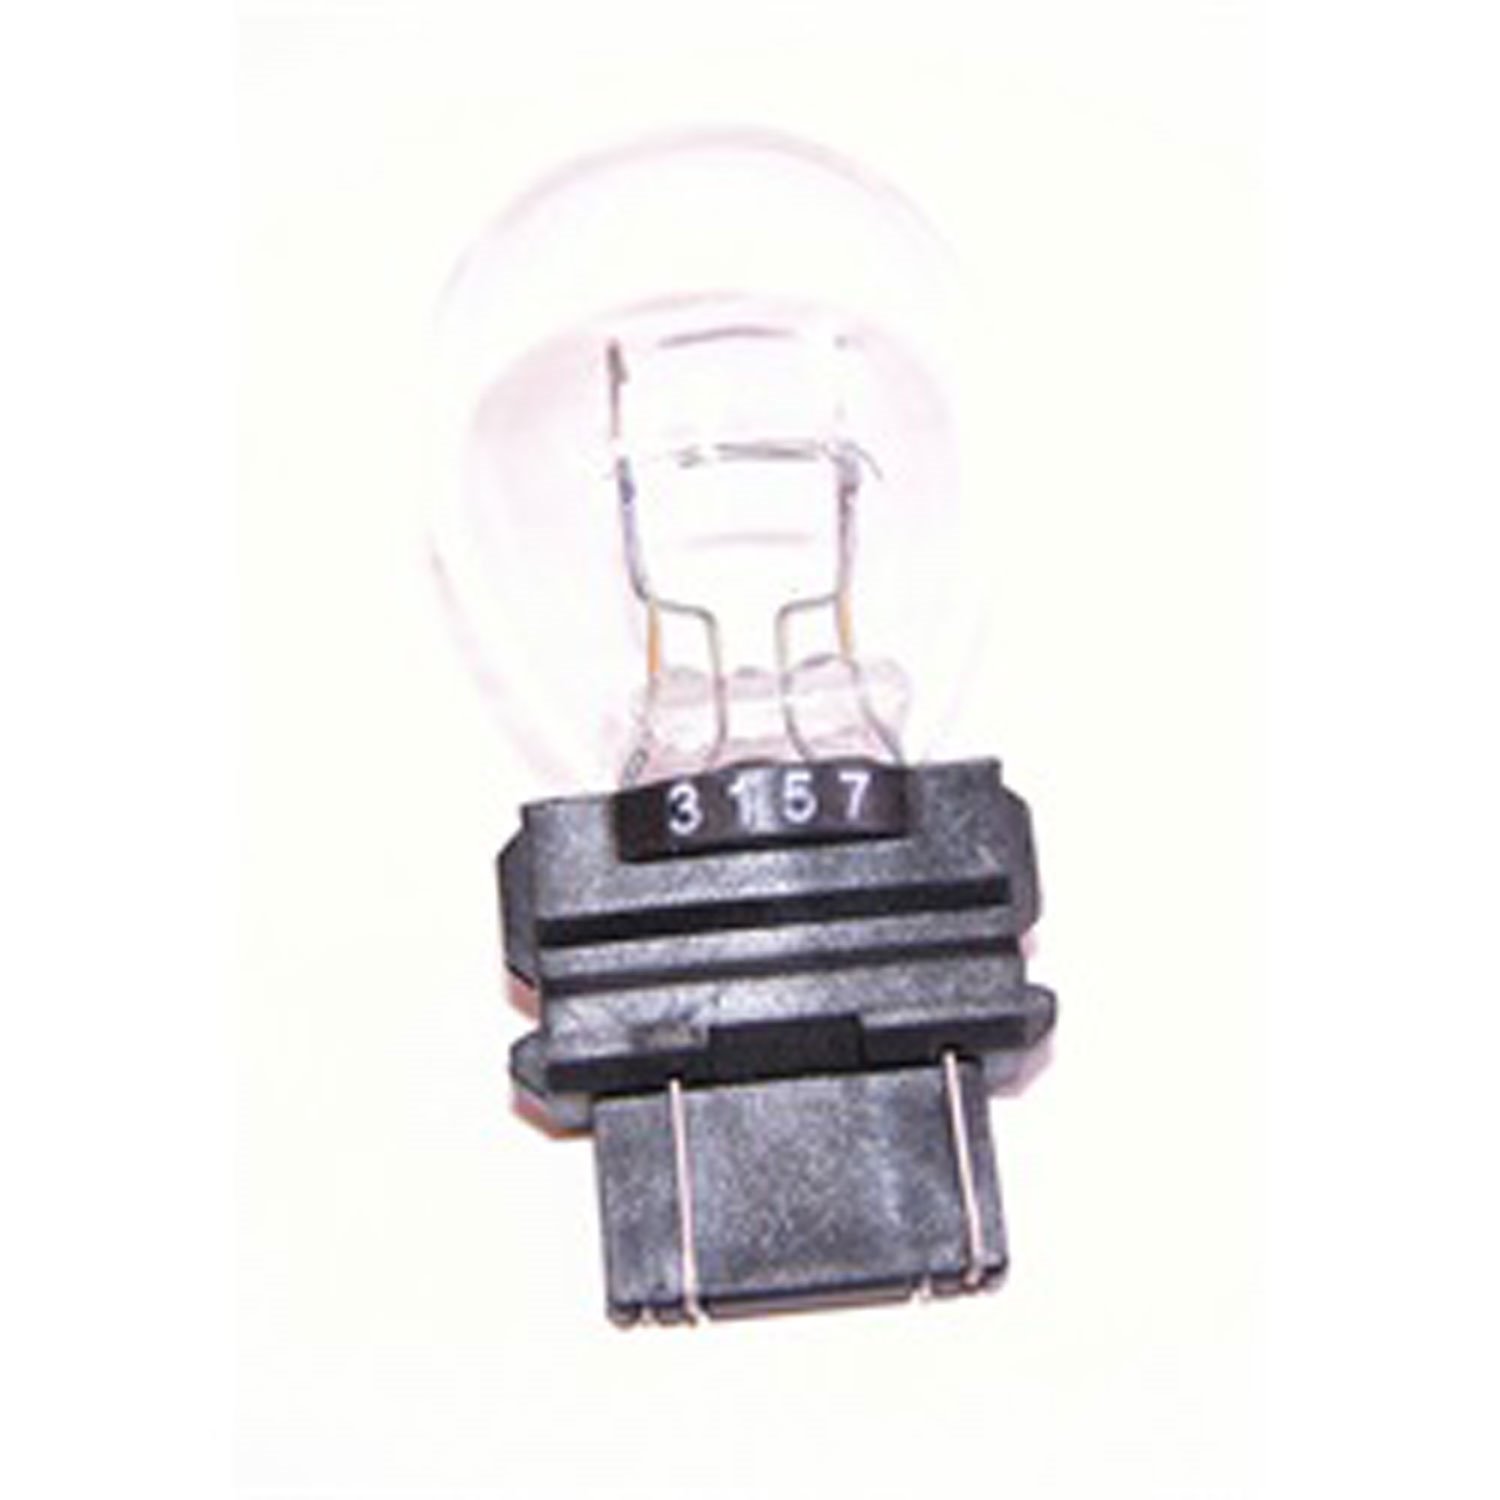 This clear replacement front parking lamp light bulb #3157 from Omix-ADA fits 1994-2014 Jeep Wranglers YJ/TJ/LJ/JK